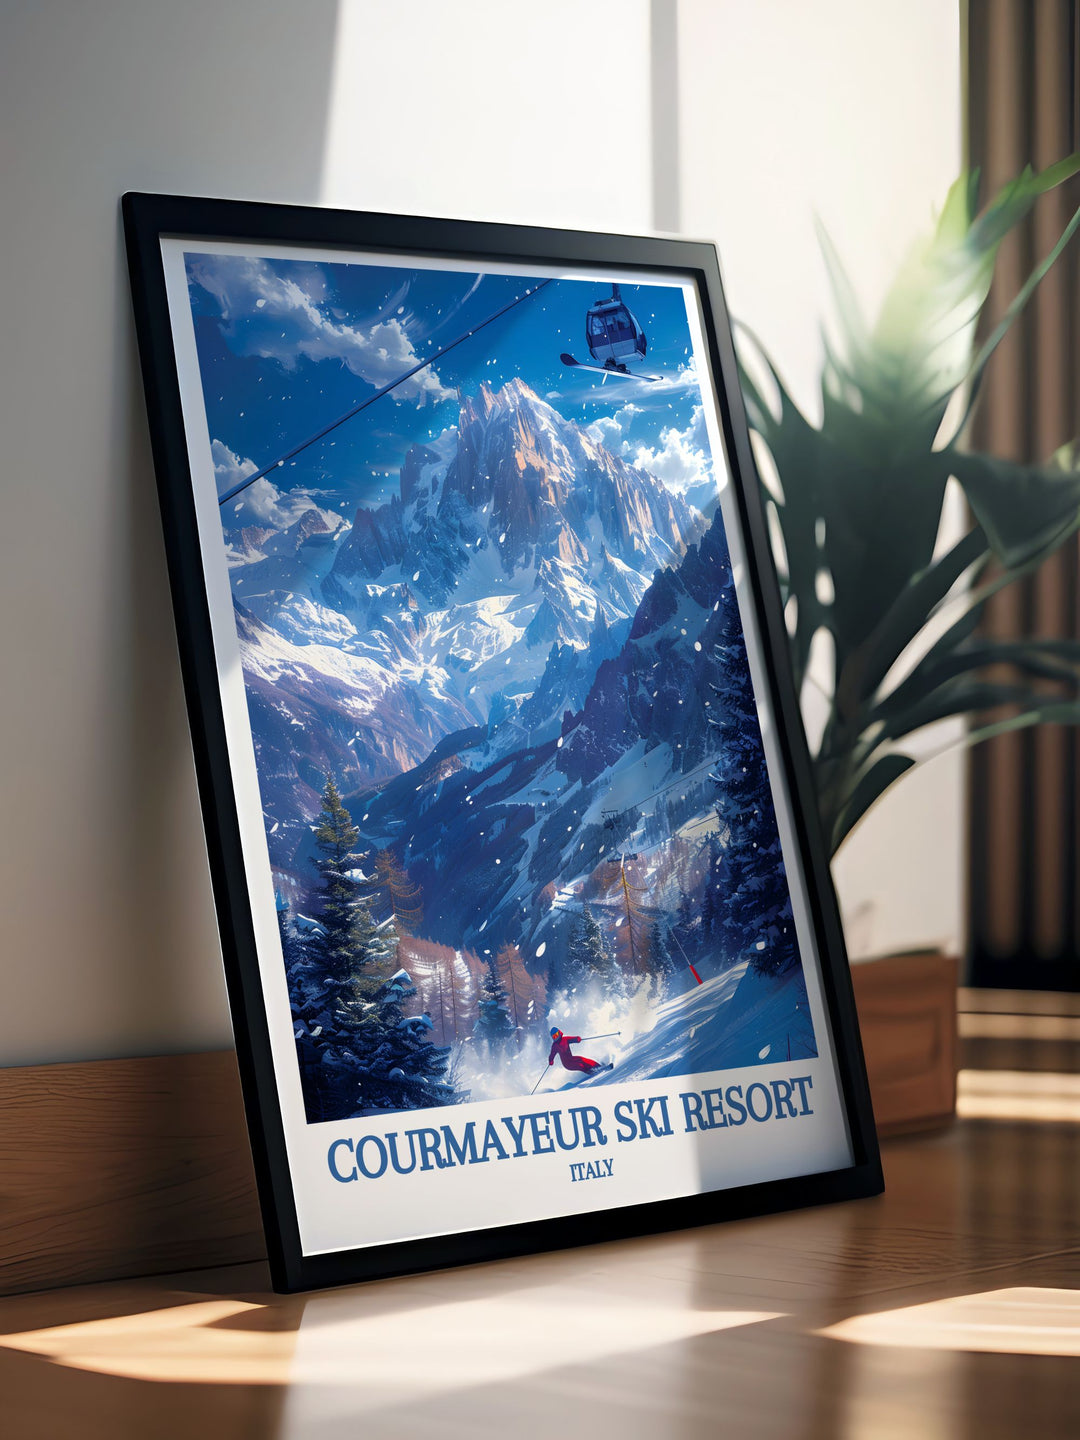 The combination of adventure in Courmayeur and the scenic majesty of Mont Blanc is beautifully captured in this vintage ski poster, making it a stunning addition to any wall art collection celebrating Italian skiing.